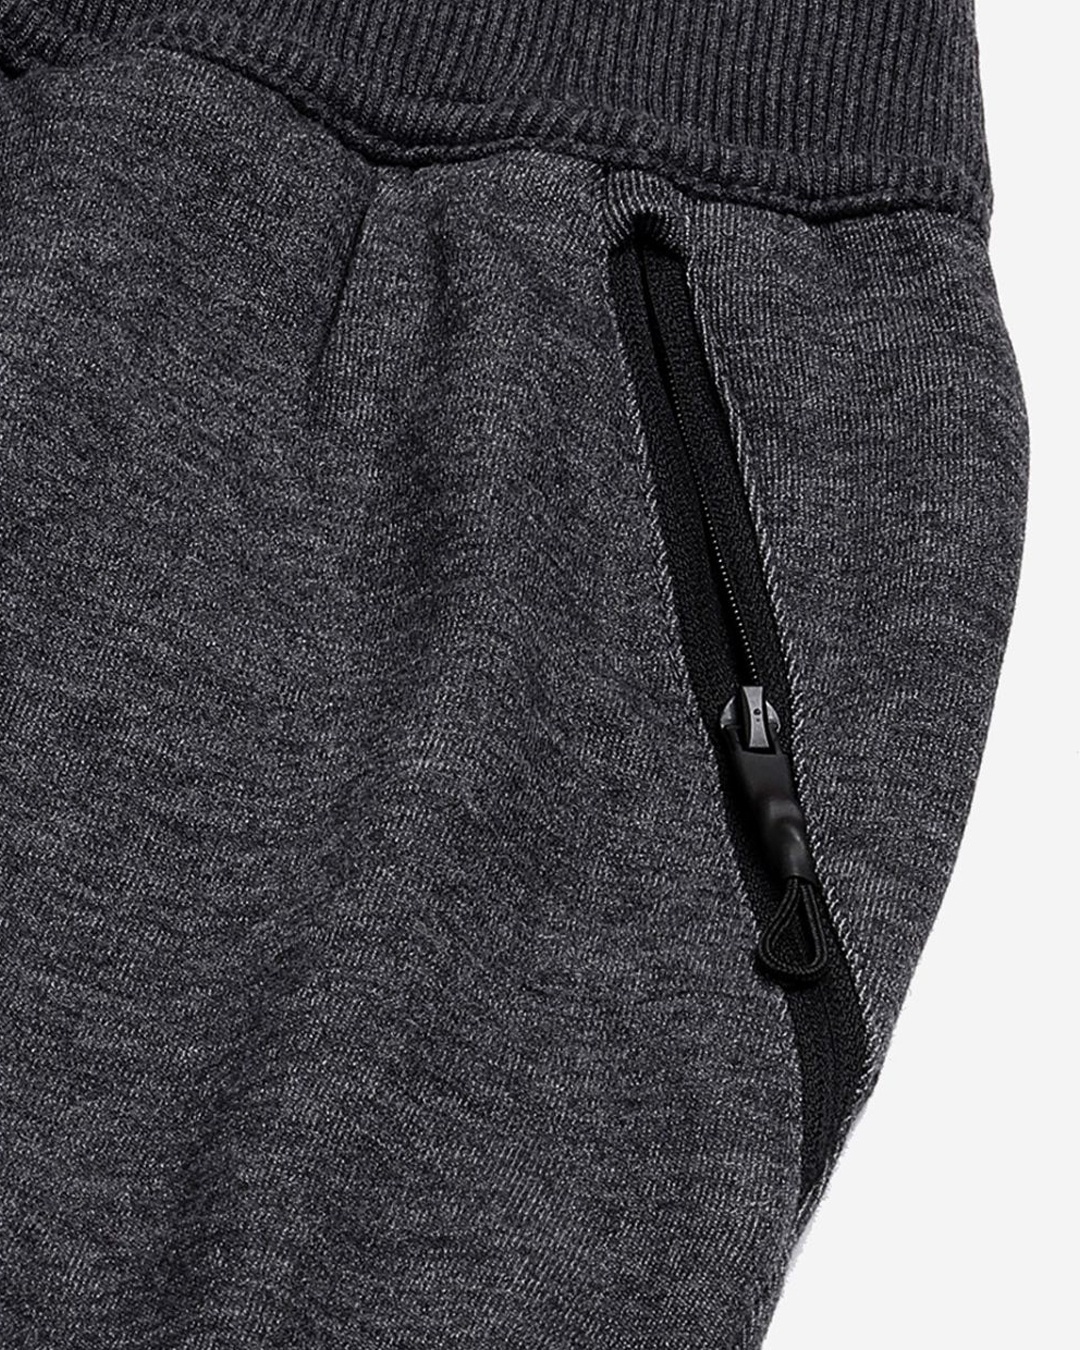 Shop Men Charcoal Grey Pure Cotton Mid Rise Training Or Gym Sports Shorts